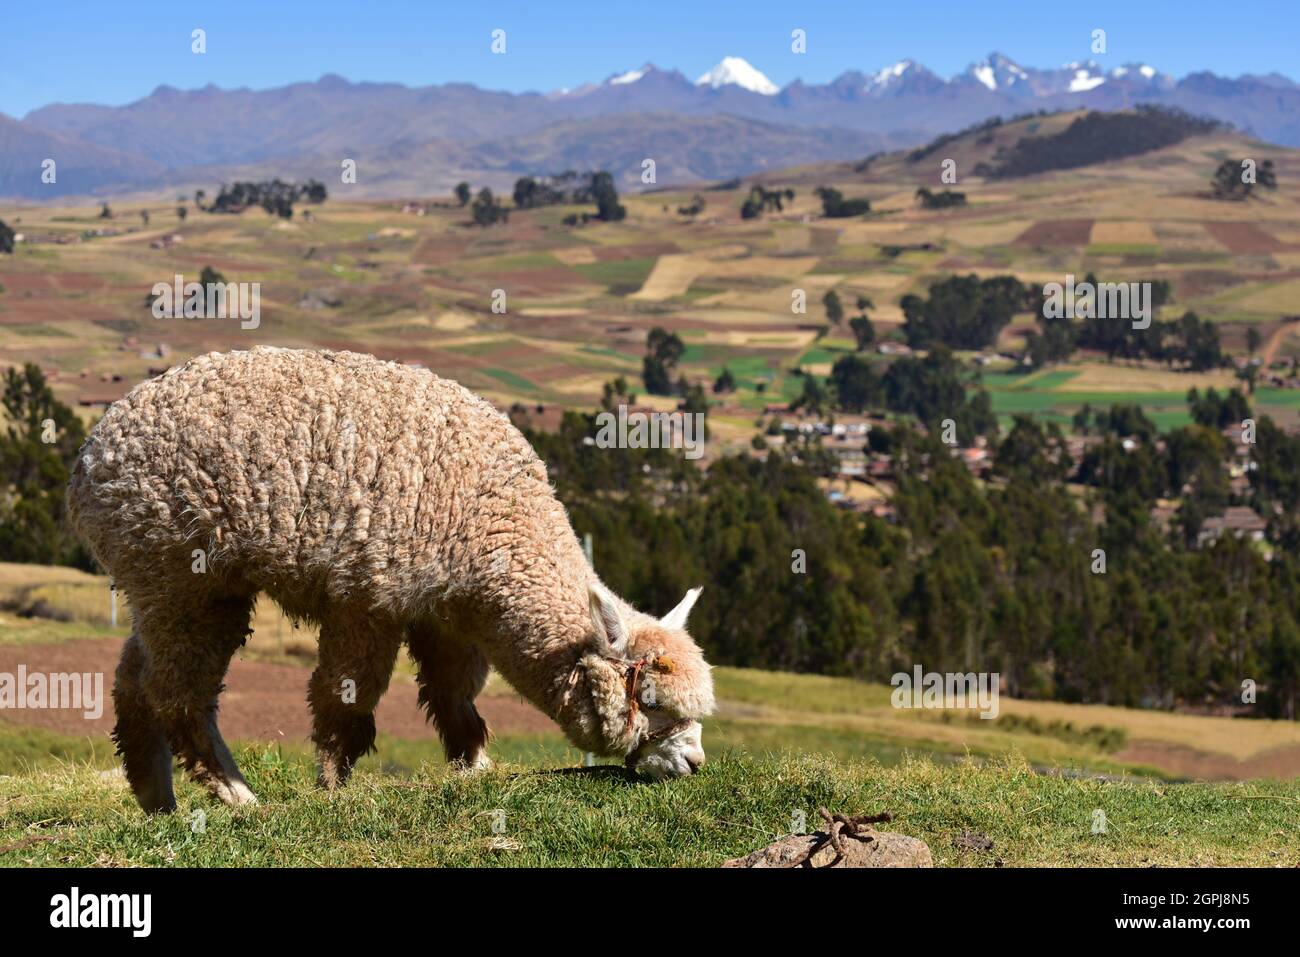 Alpaca (Lama pacos)  grazing with Andean landscape on background Stock Photo